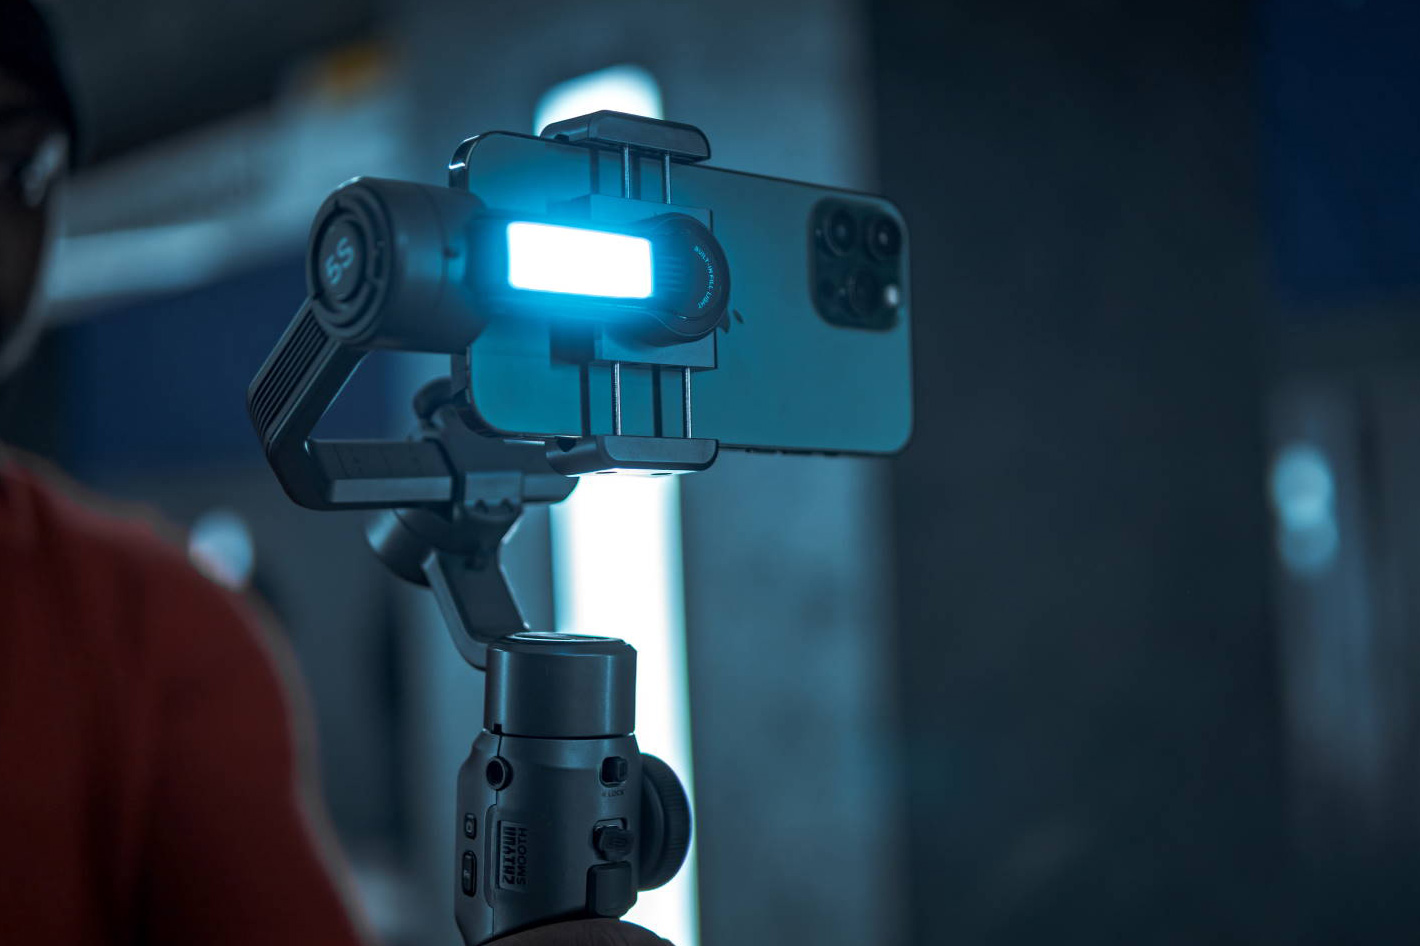 ZHIYUN SMOOTH 5S: the smartphone gimbal for one-person film crew